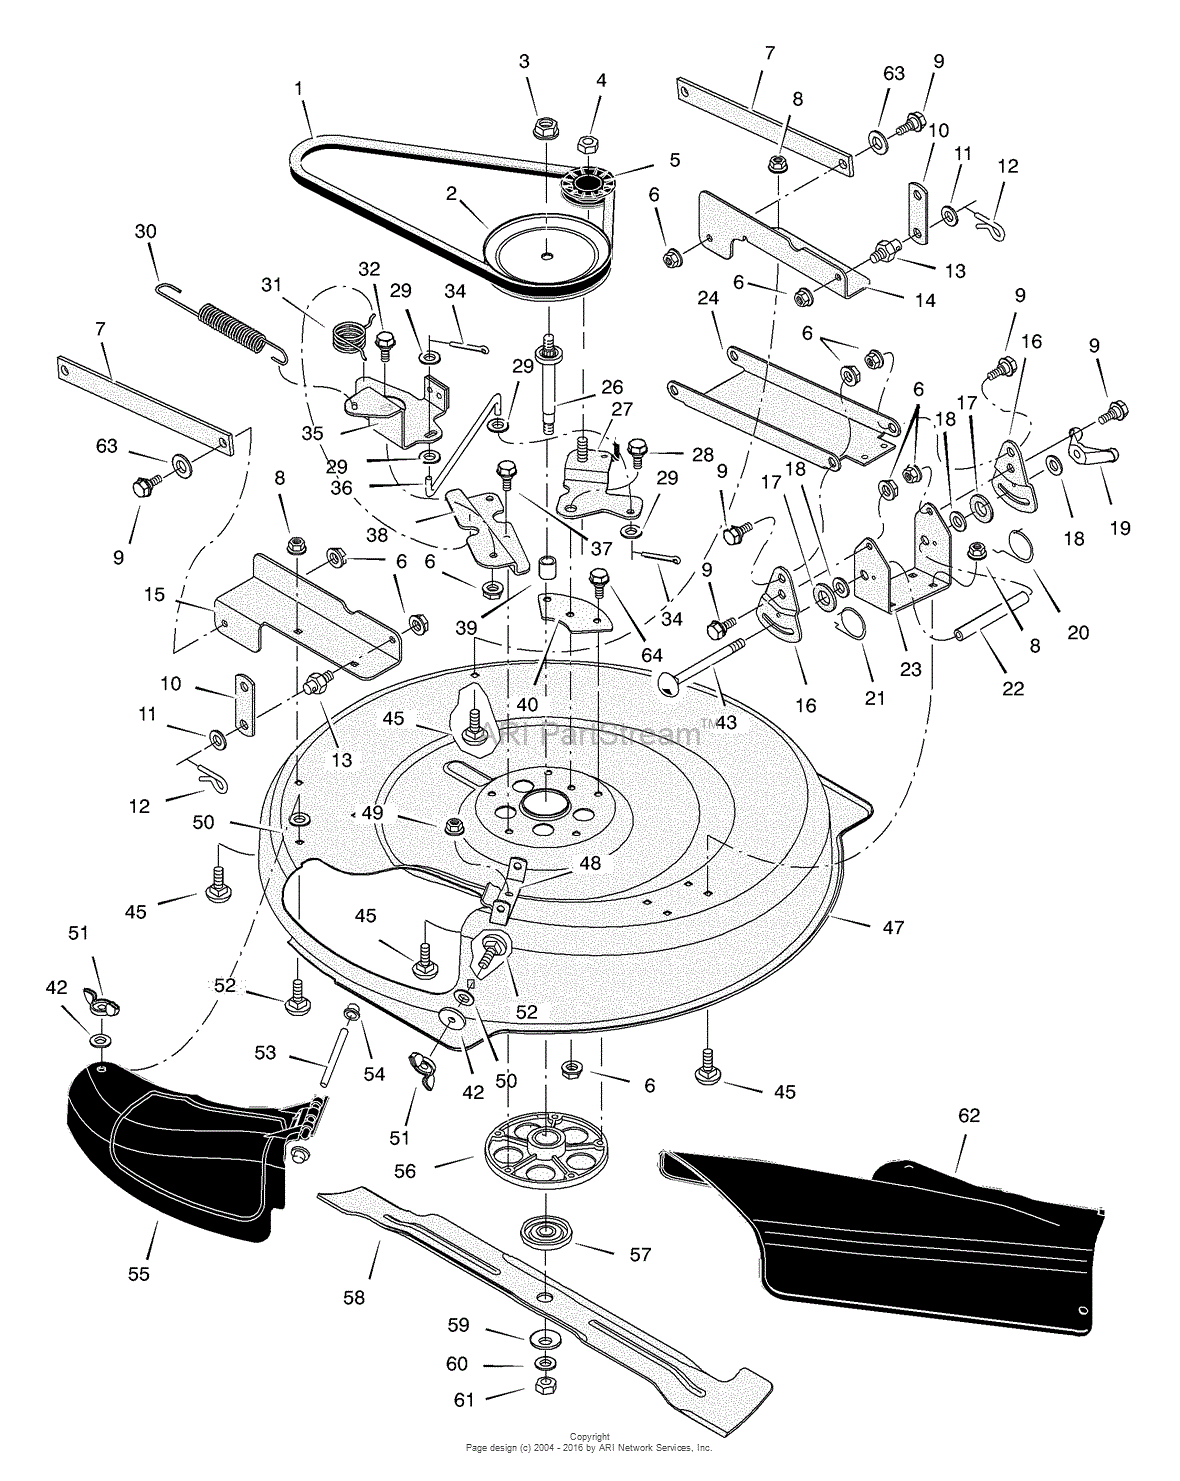 Labeled Lawn Mower Parts Diagram